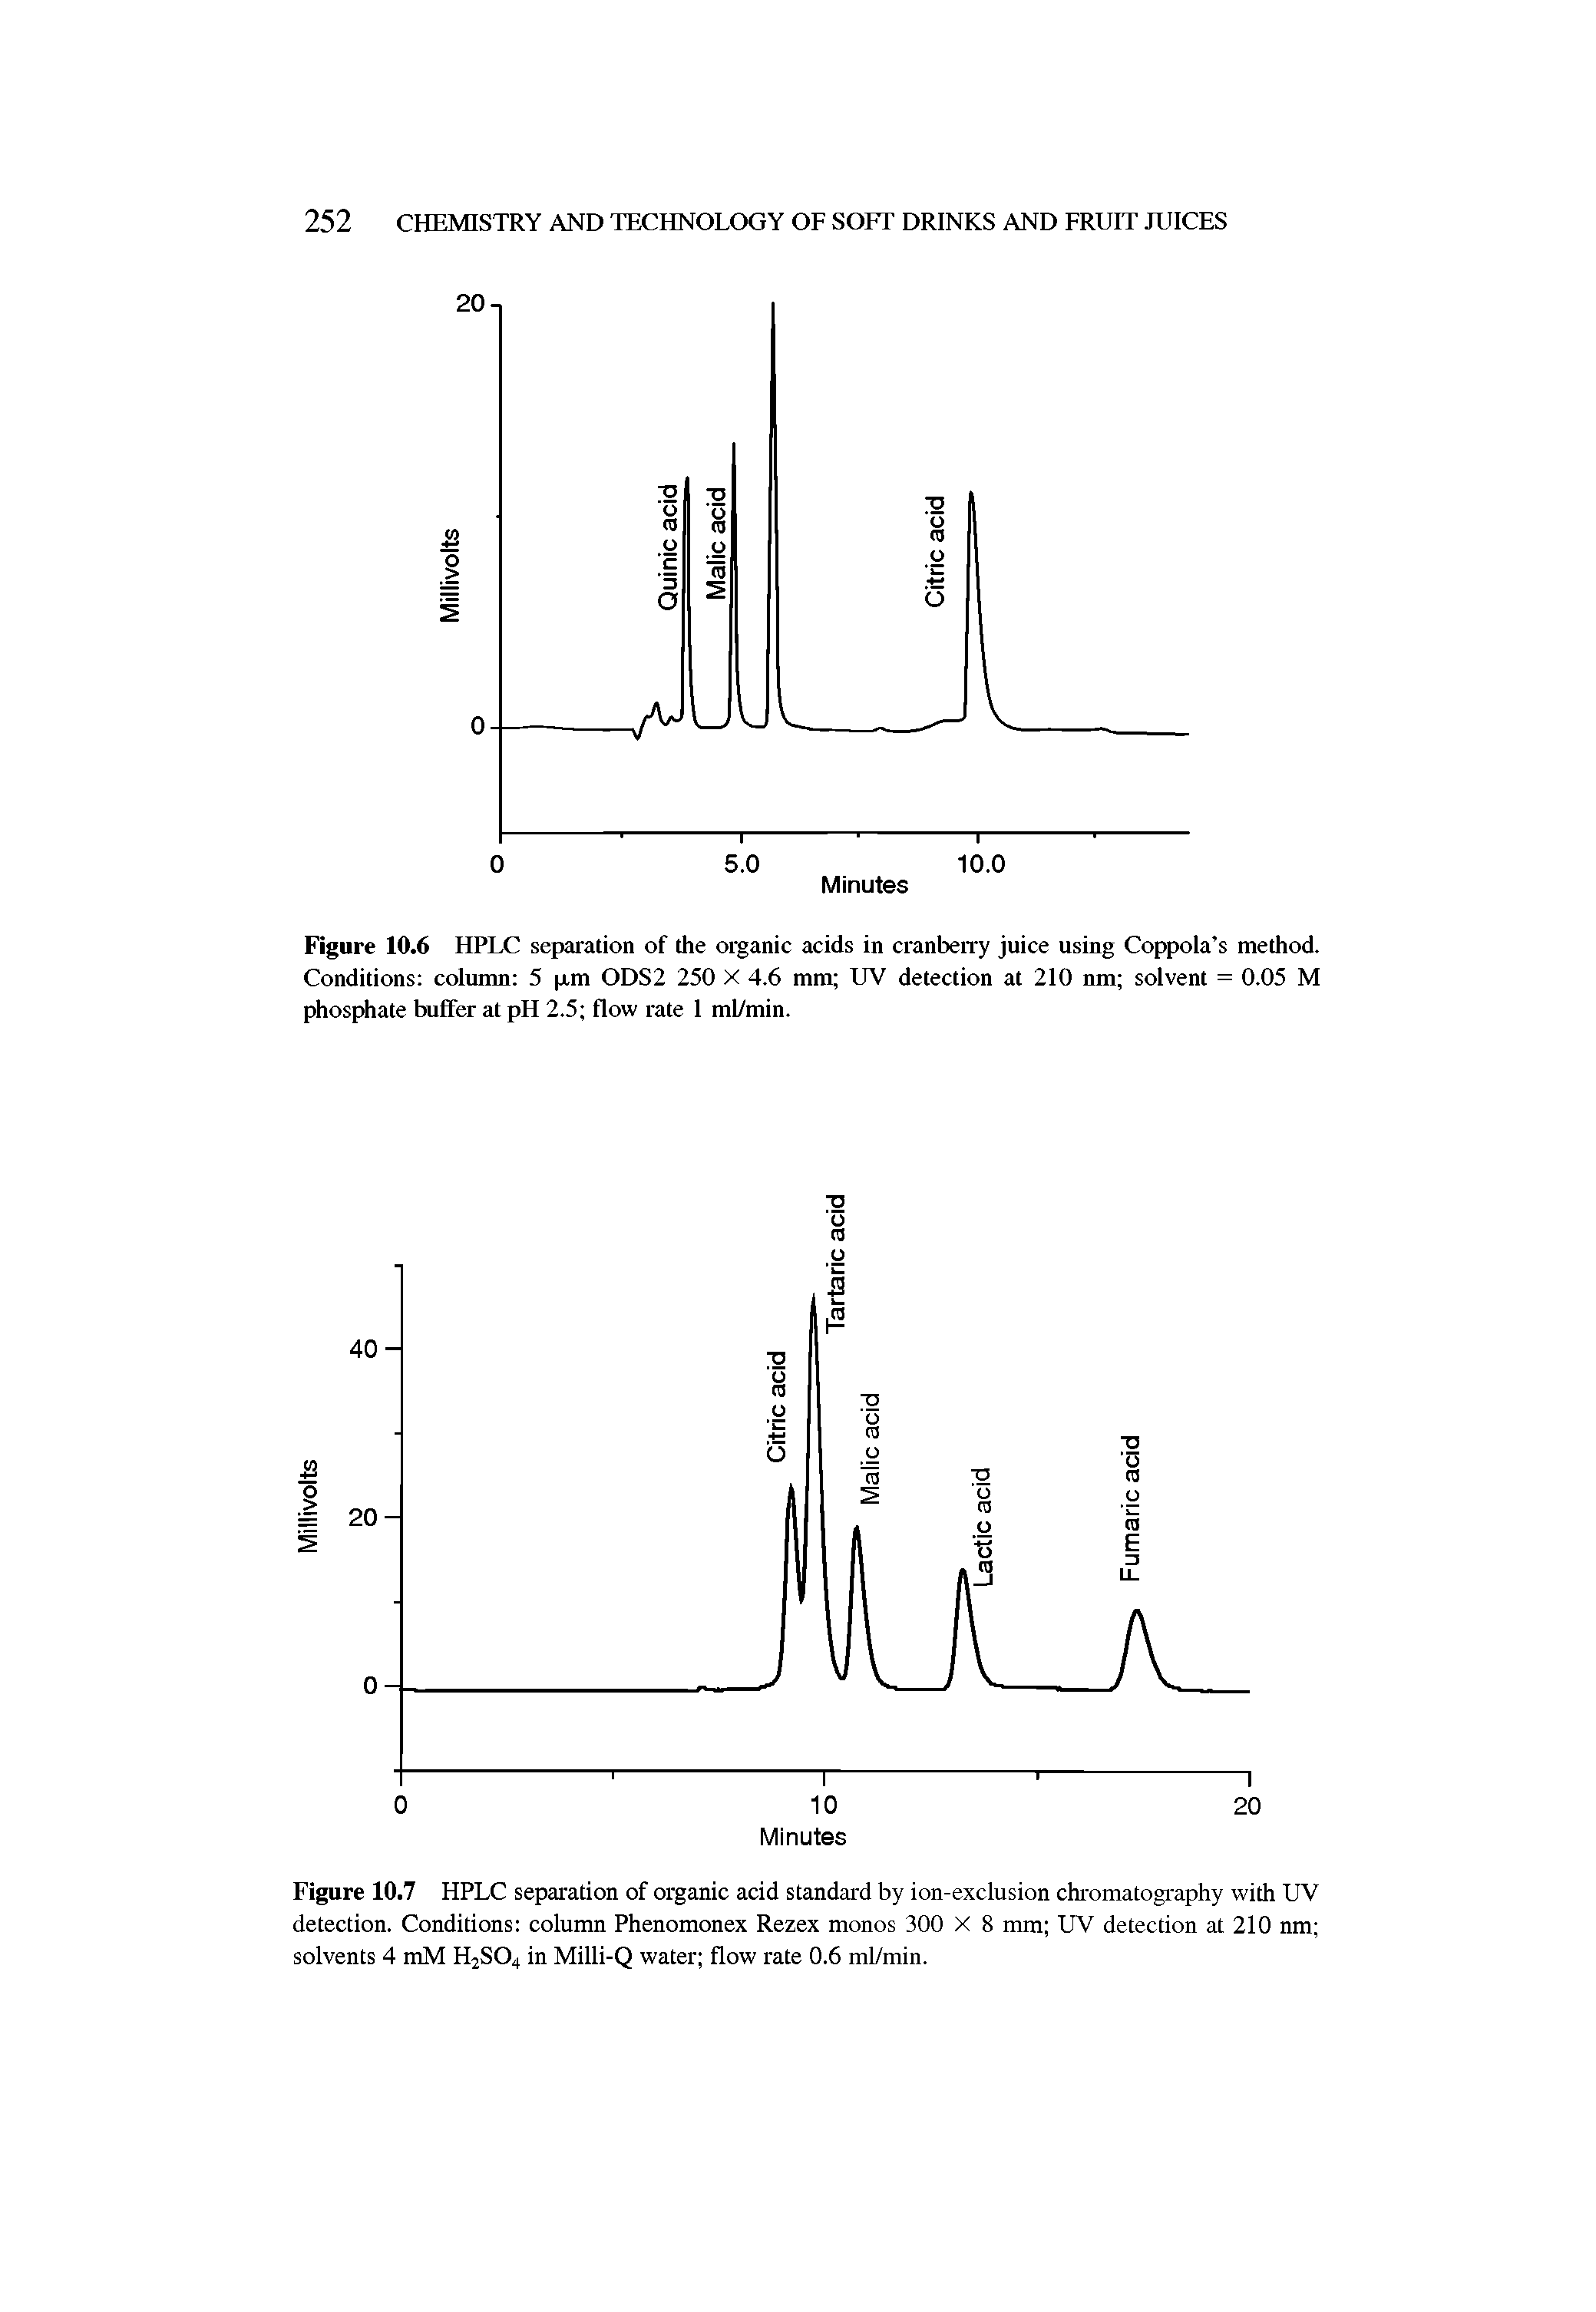 Figure 10.7 HPLC separation of organic acid standard by ion-exclusion chromatography with UV detection. Conditions column Phenomonex Rezex monos 300 X 8 mm UV detection at 210 nm solvents 4 mM H2S04 in Milli-Q water flow rate 0.6 ml/min.